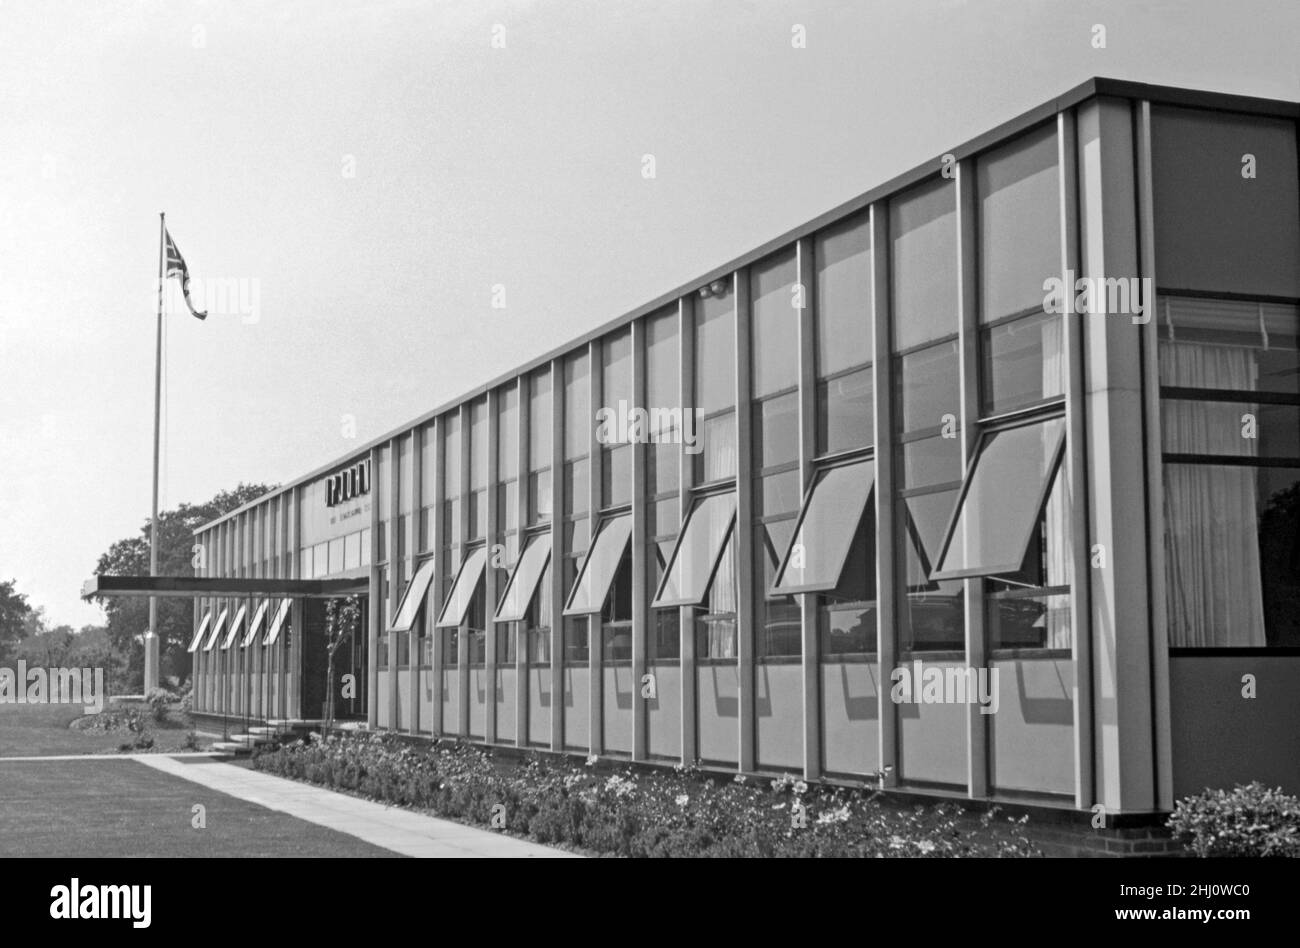 A 1960s photograph of new modern offices and laboratories, for Upjohn, a pharmaceutical company, in Fleming Way, Crawley ‘New Town’, West Sussex, England, UK – it opened in 1957. The Union flag is raised on the flagpole. The area has undergone massive changes and modernisation since this period. Upjohn became Pharmacia and Upjohn – the company was owned by Pfizer from 2015 until 2020. In 2020 the company merged with Mylan to form Viatris. This image is from an old amateur black and white transparency – a vintage 1960s photograph. Stock Photo